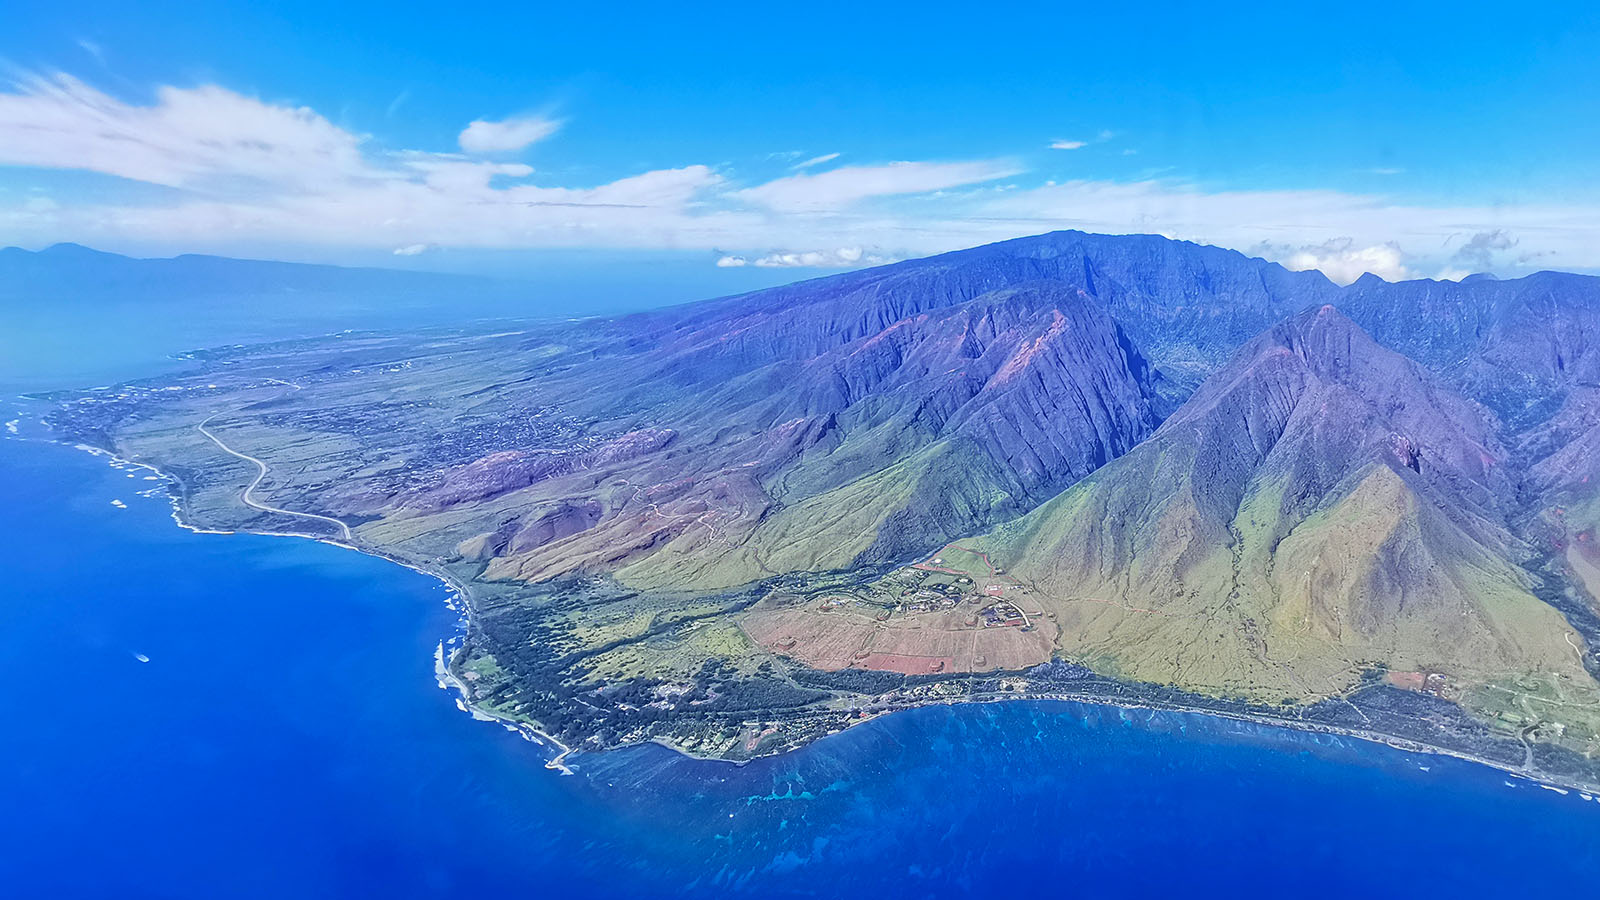 Use the window seat to take photos of Hawaii's mountains